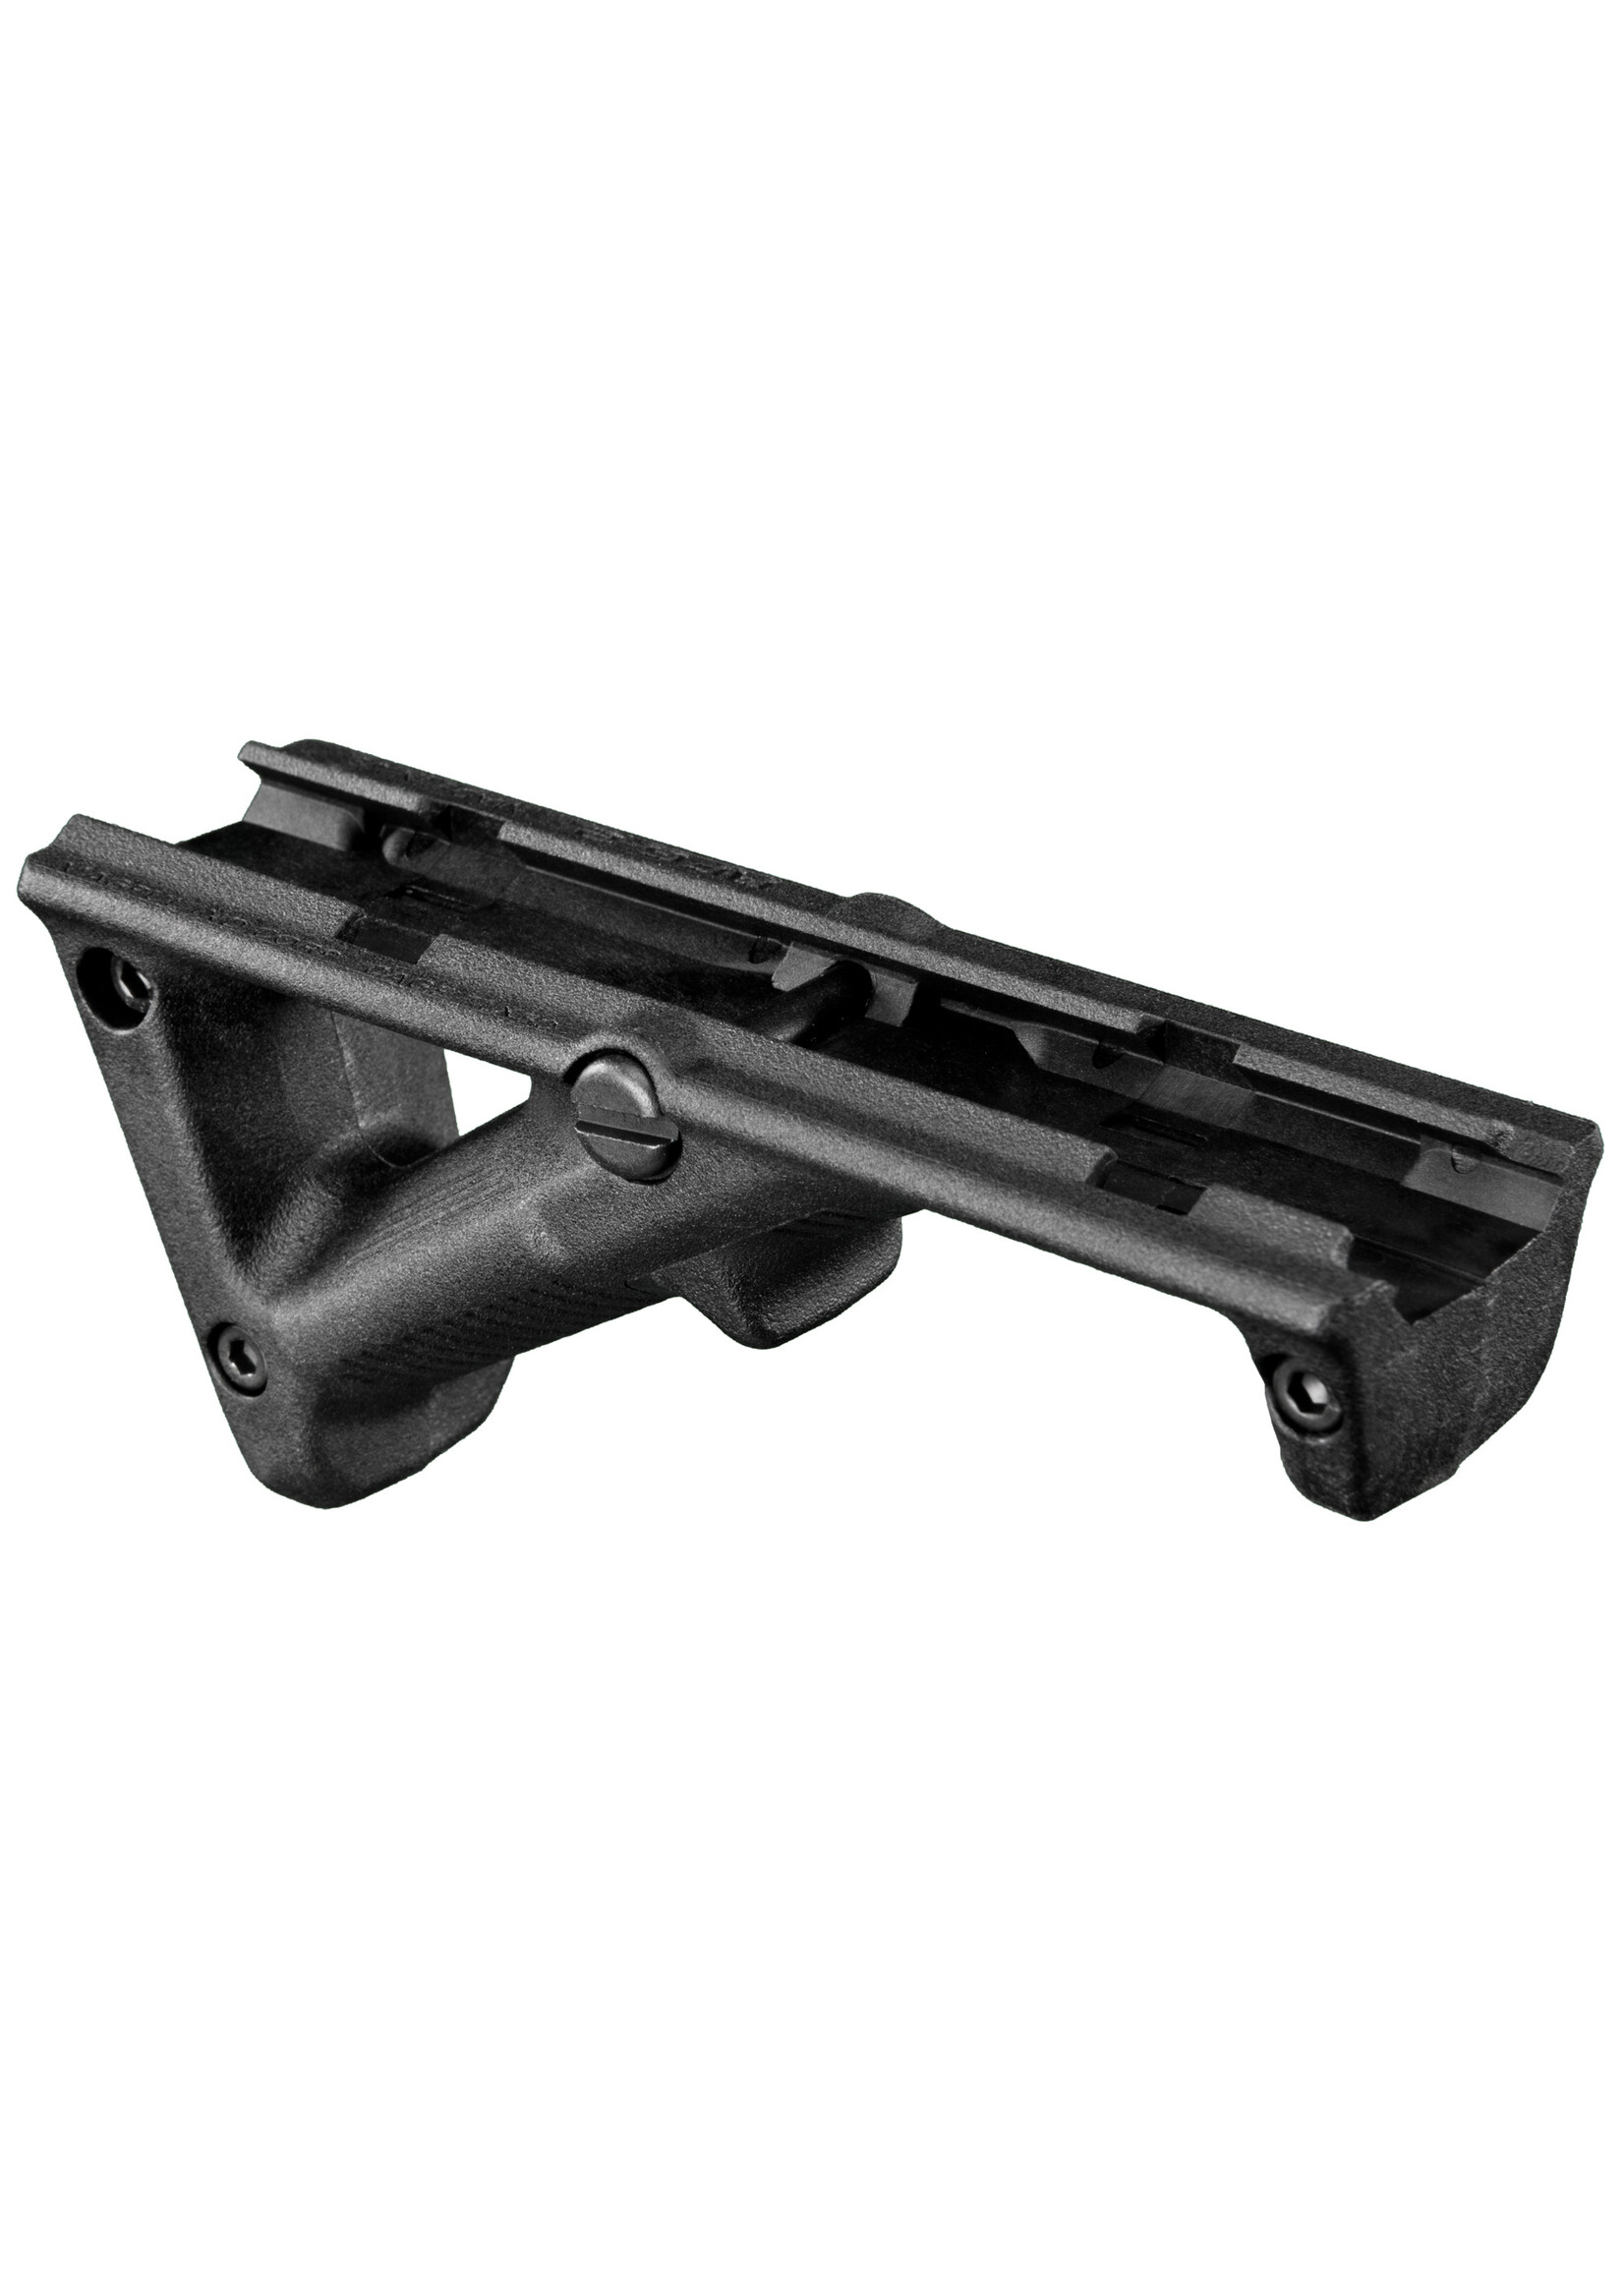 MAGPUL AFG 2 ANGLED FOREGRIP BLK